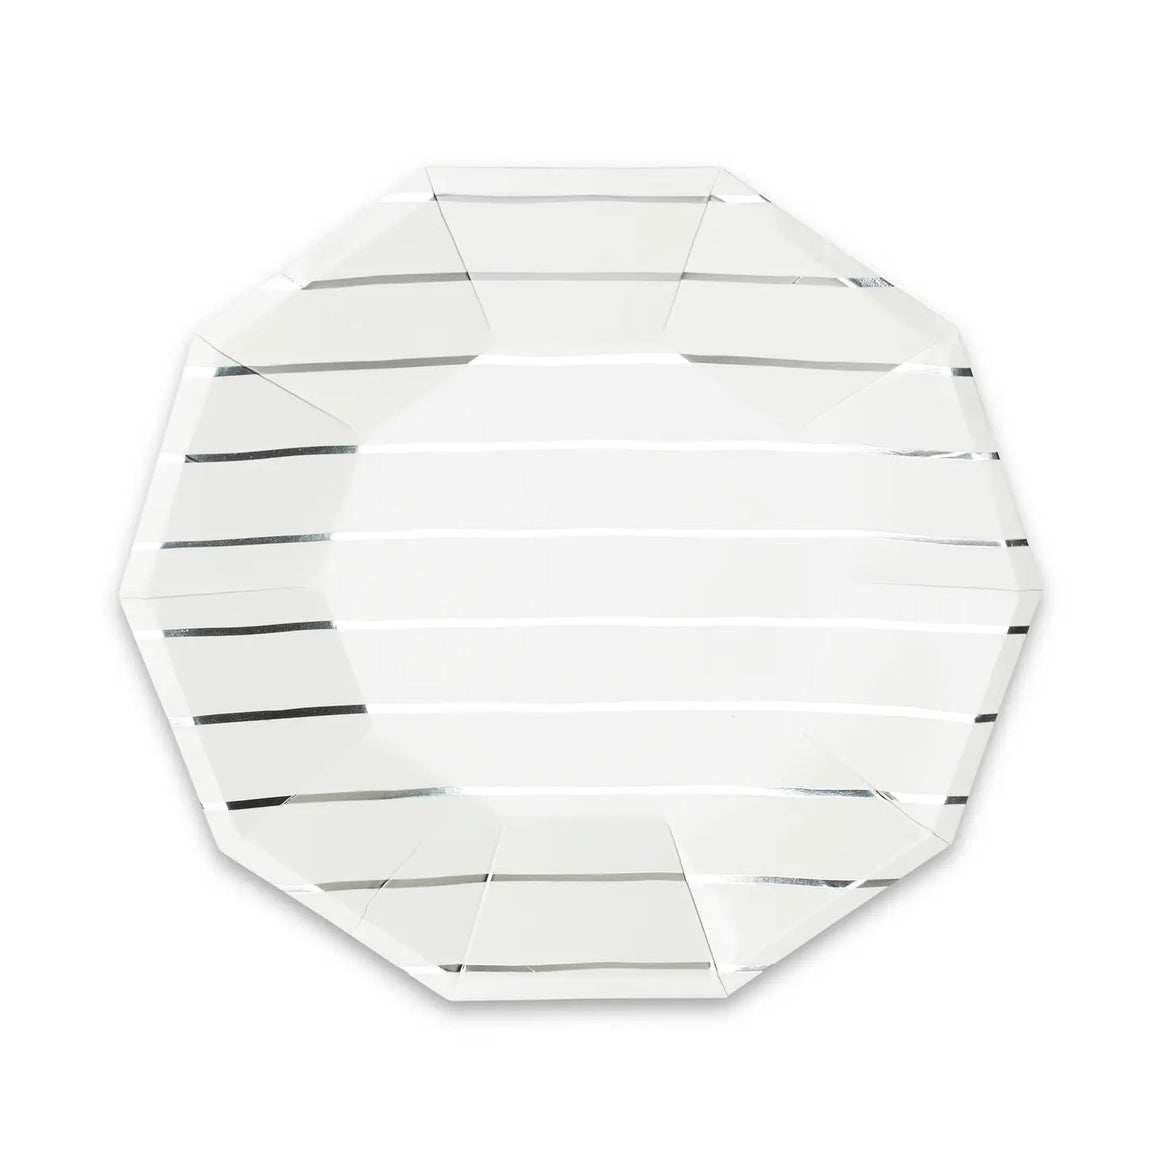 PLATES SMALL - SILVER DAYDREAM SOCIETY FRENCHIE STRIPES